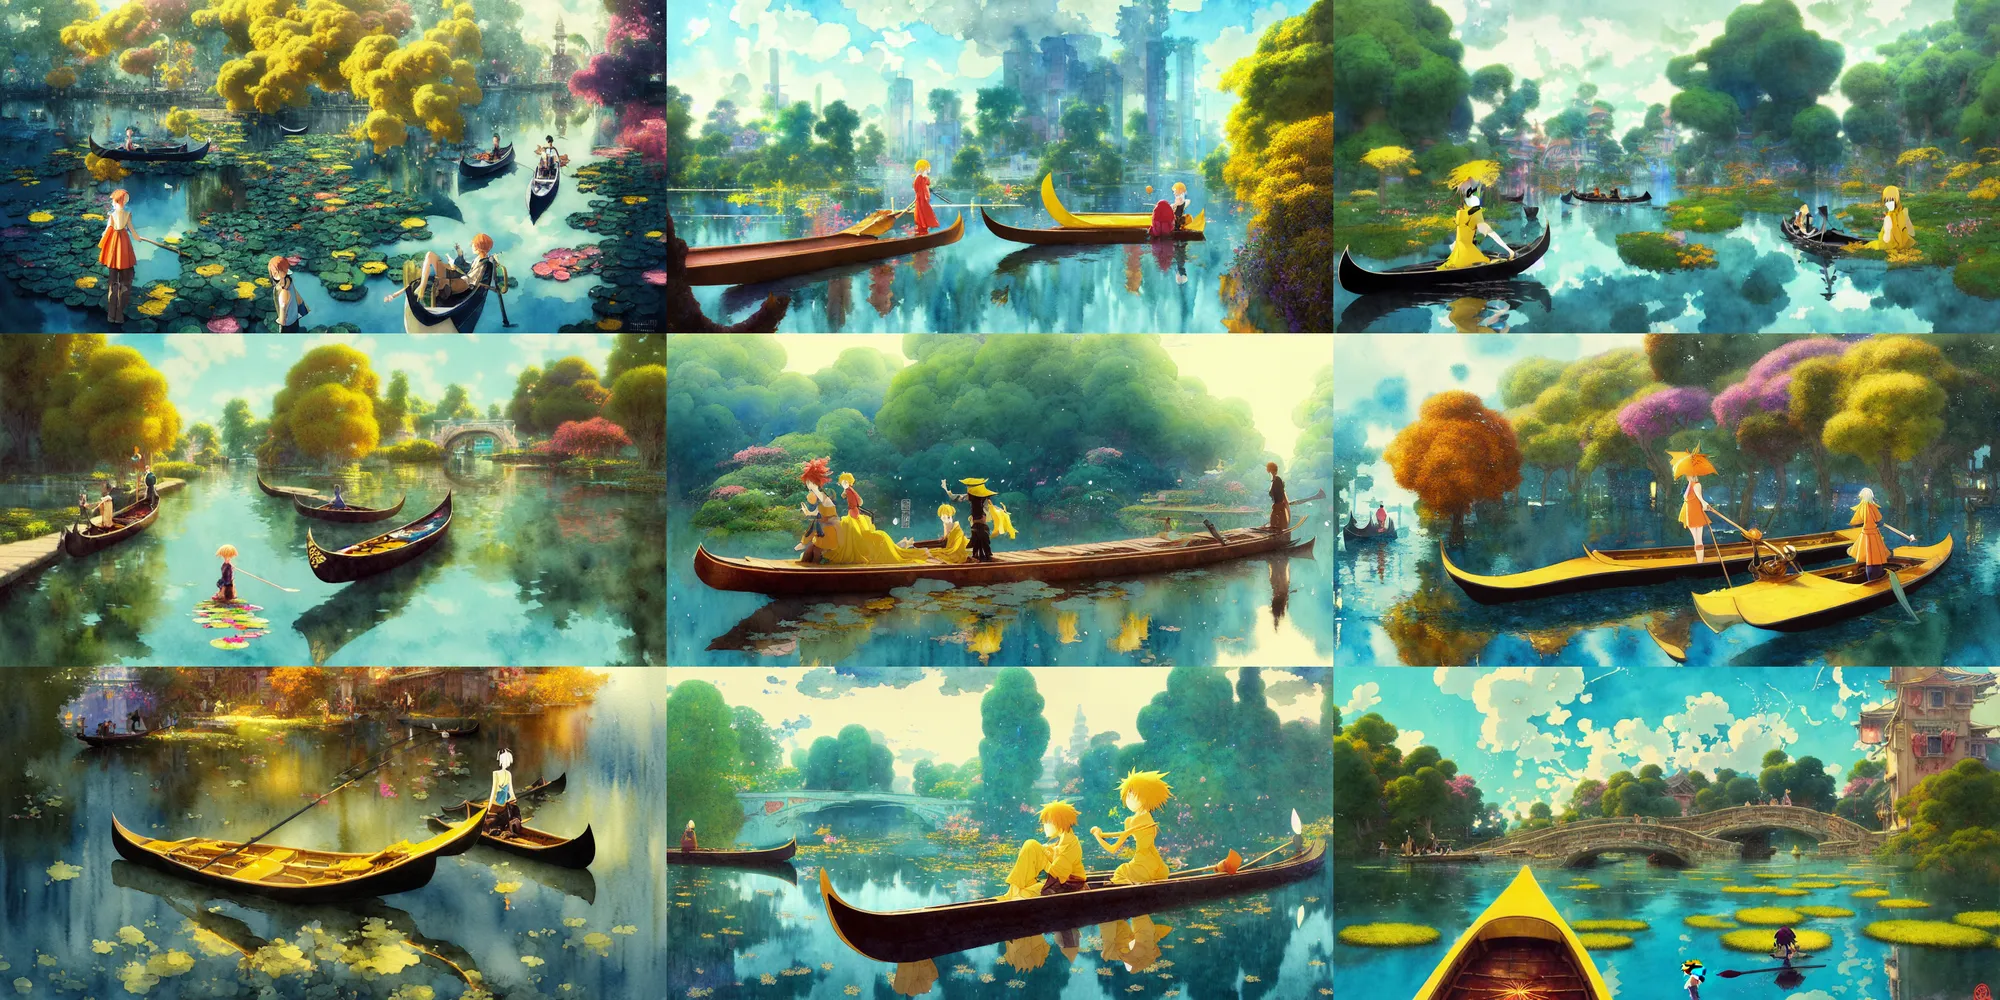 Prompt: anime movie scene, characters, waterway, fantasy. gondola boat, amazing composition, colorful watercolor, lily pads, reflections, by ruan jia, by maxfield parrish, by koji morimoto, by hikari shimoda, by sparth, by zhang kechun, illustration, gloomy, yellow